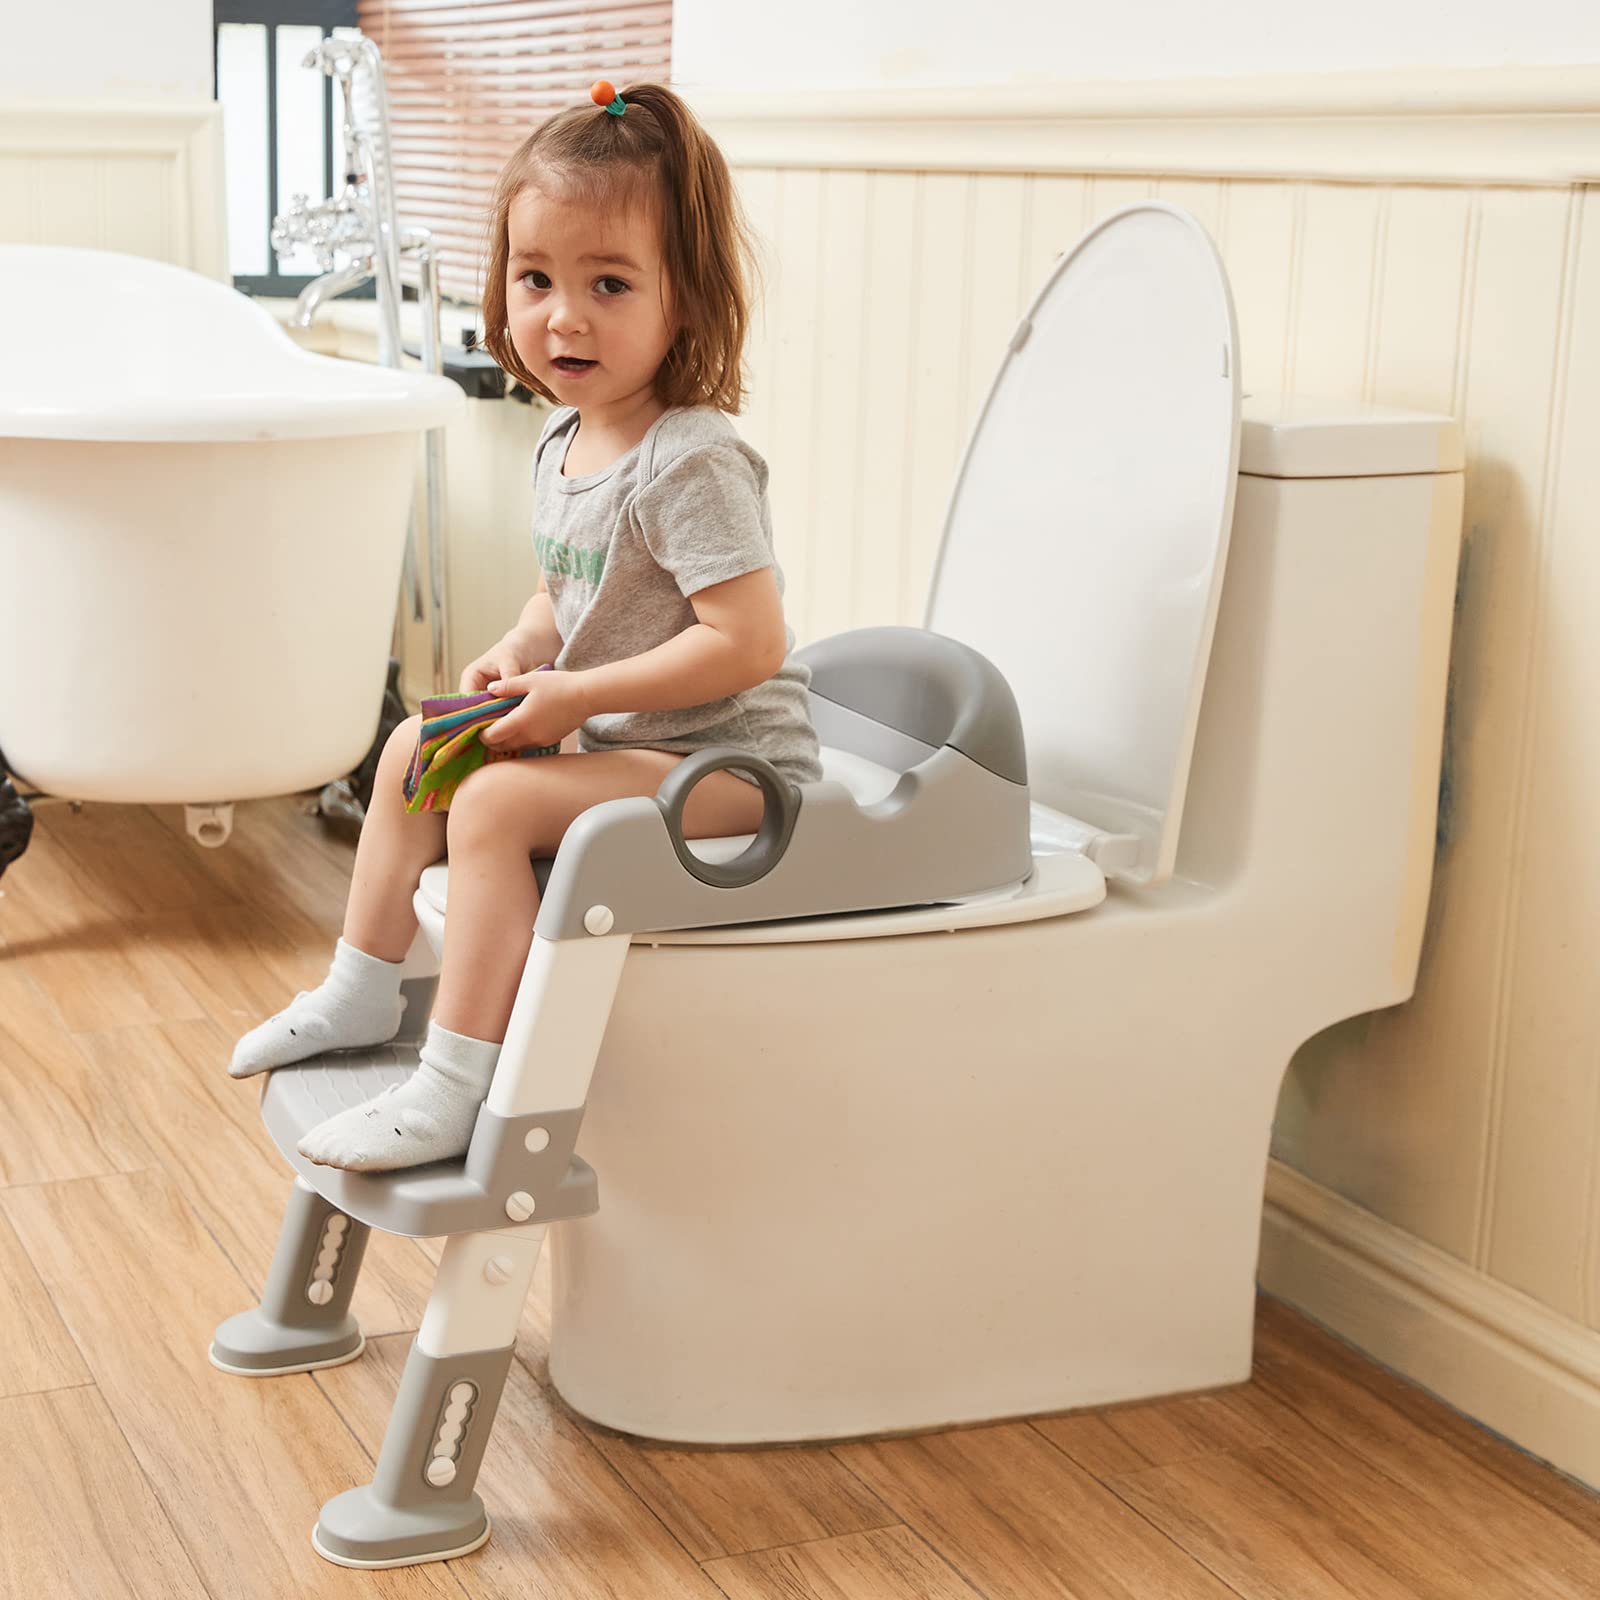 baby ladder for toilet Buy baby ladder toilet ladder chair toilet trainer potty toilet seat